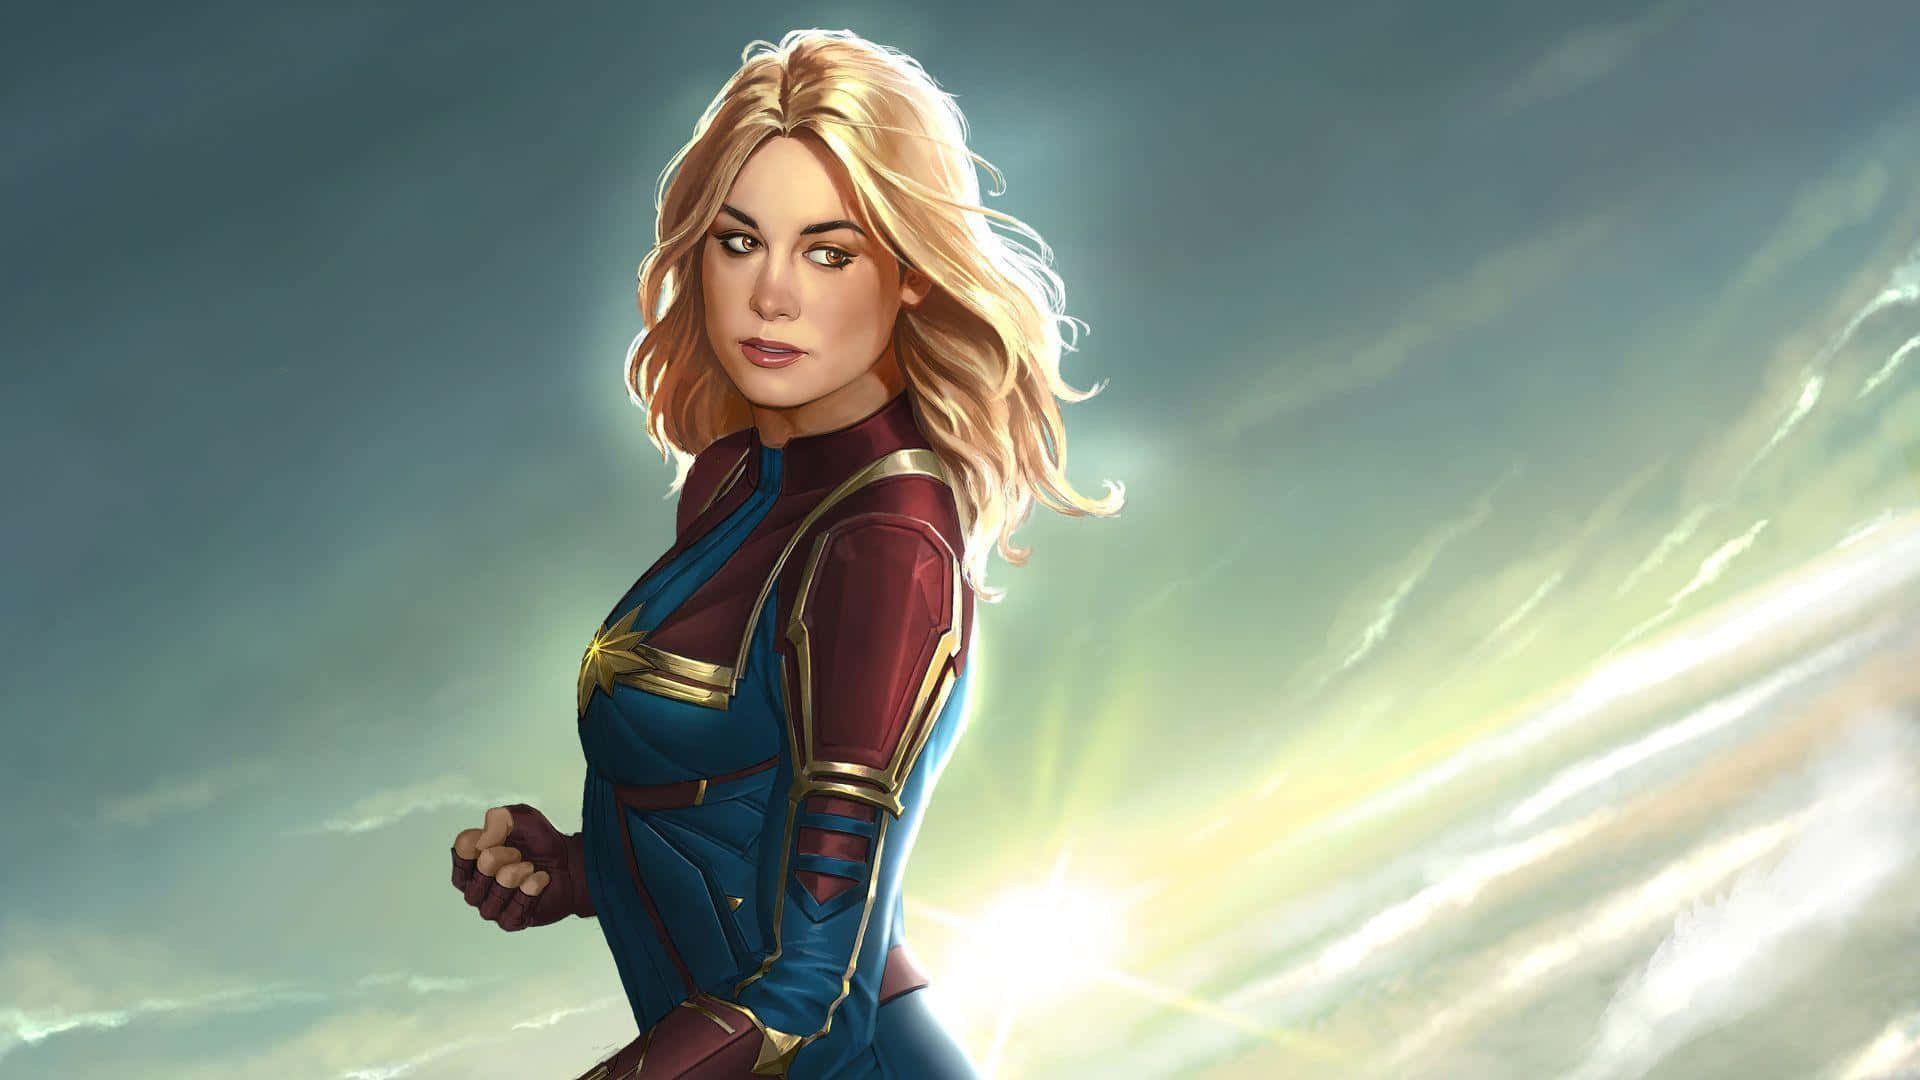 Brie Larson As Captain Marvel Soaring Through The Skies Background